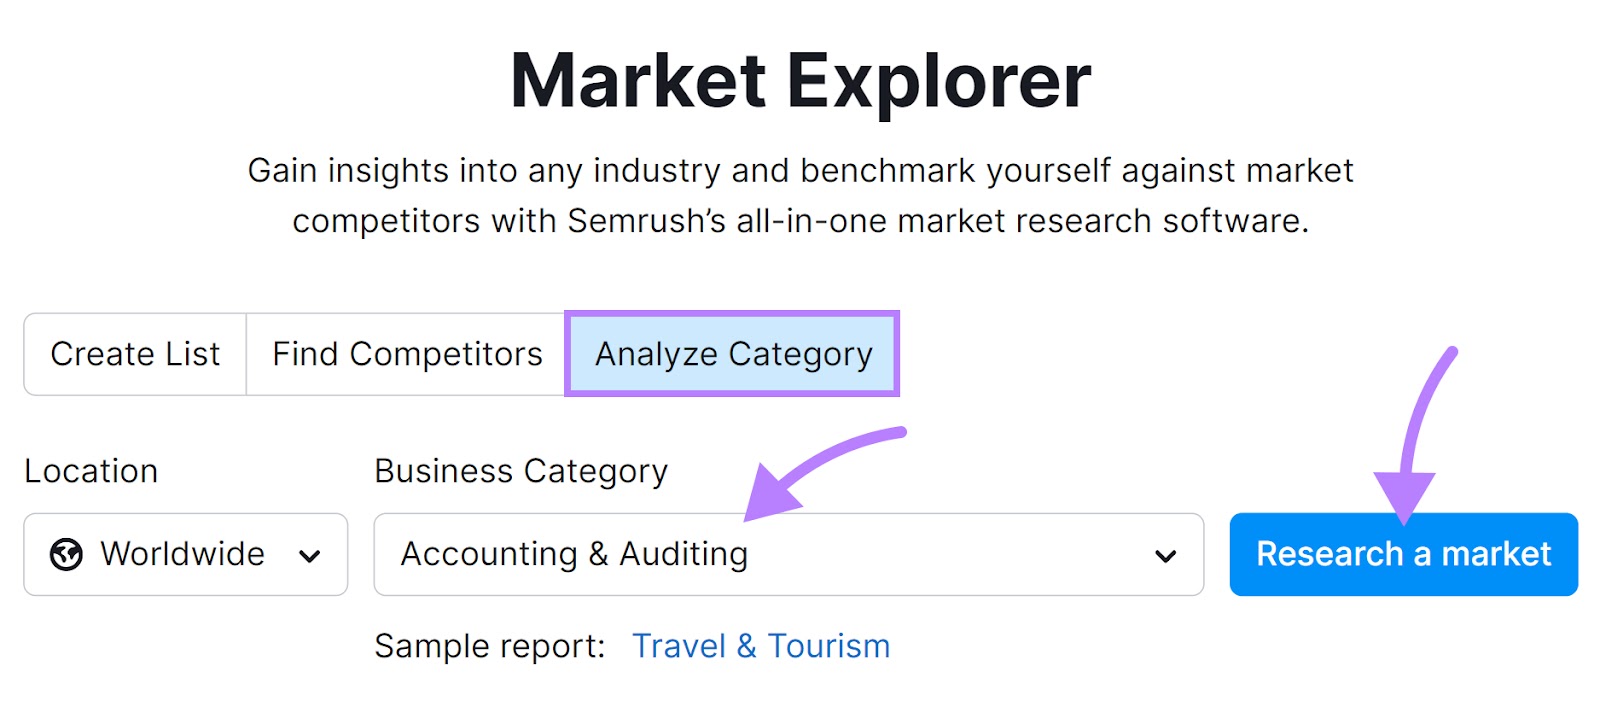 “Analyze Category” tab selected for "Accounting & Auditing" business category in Market Explorer tool